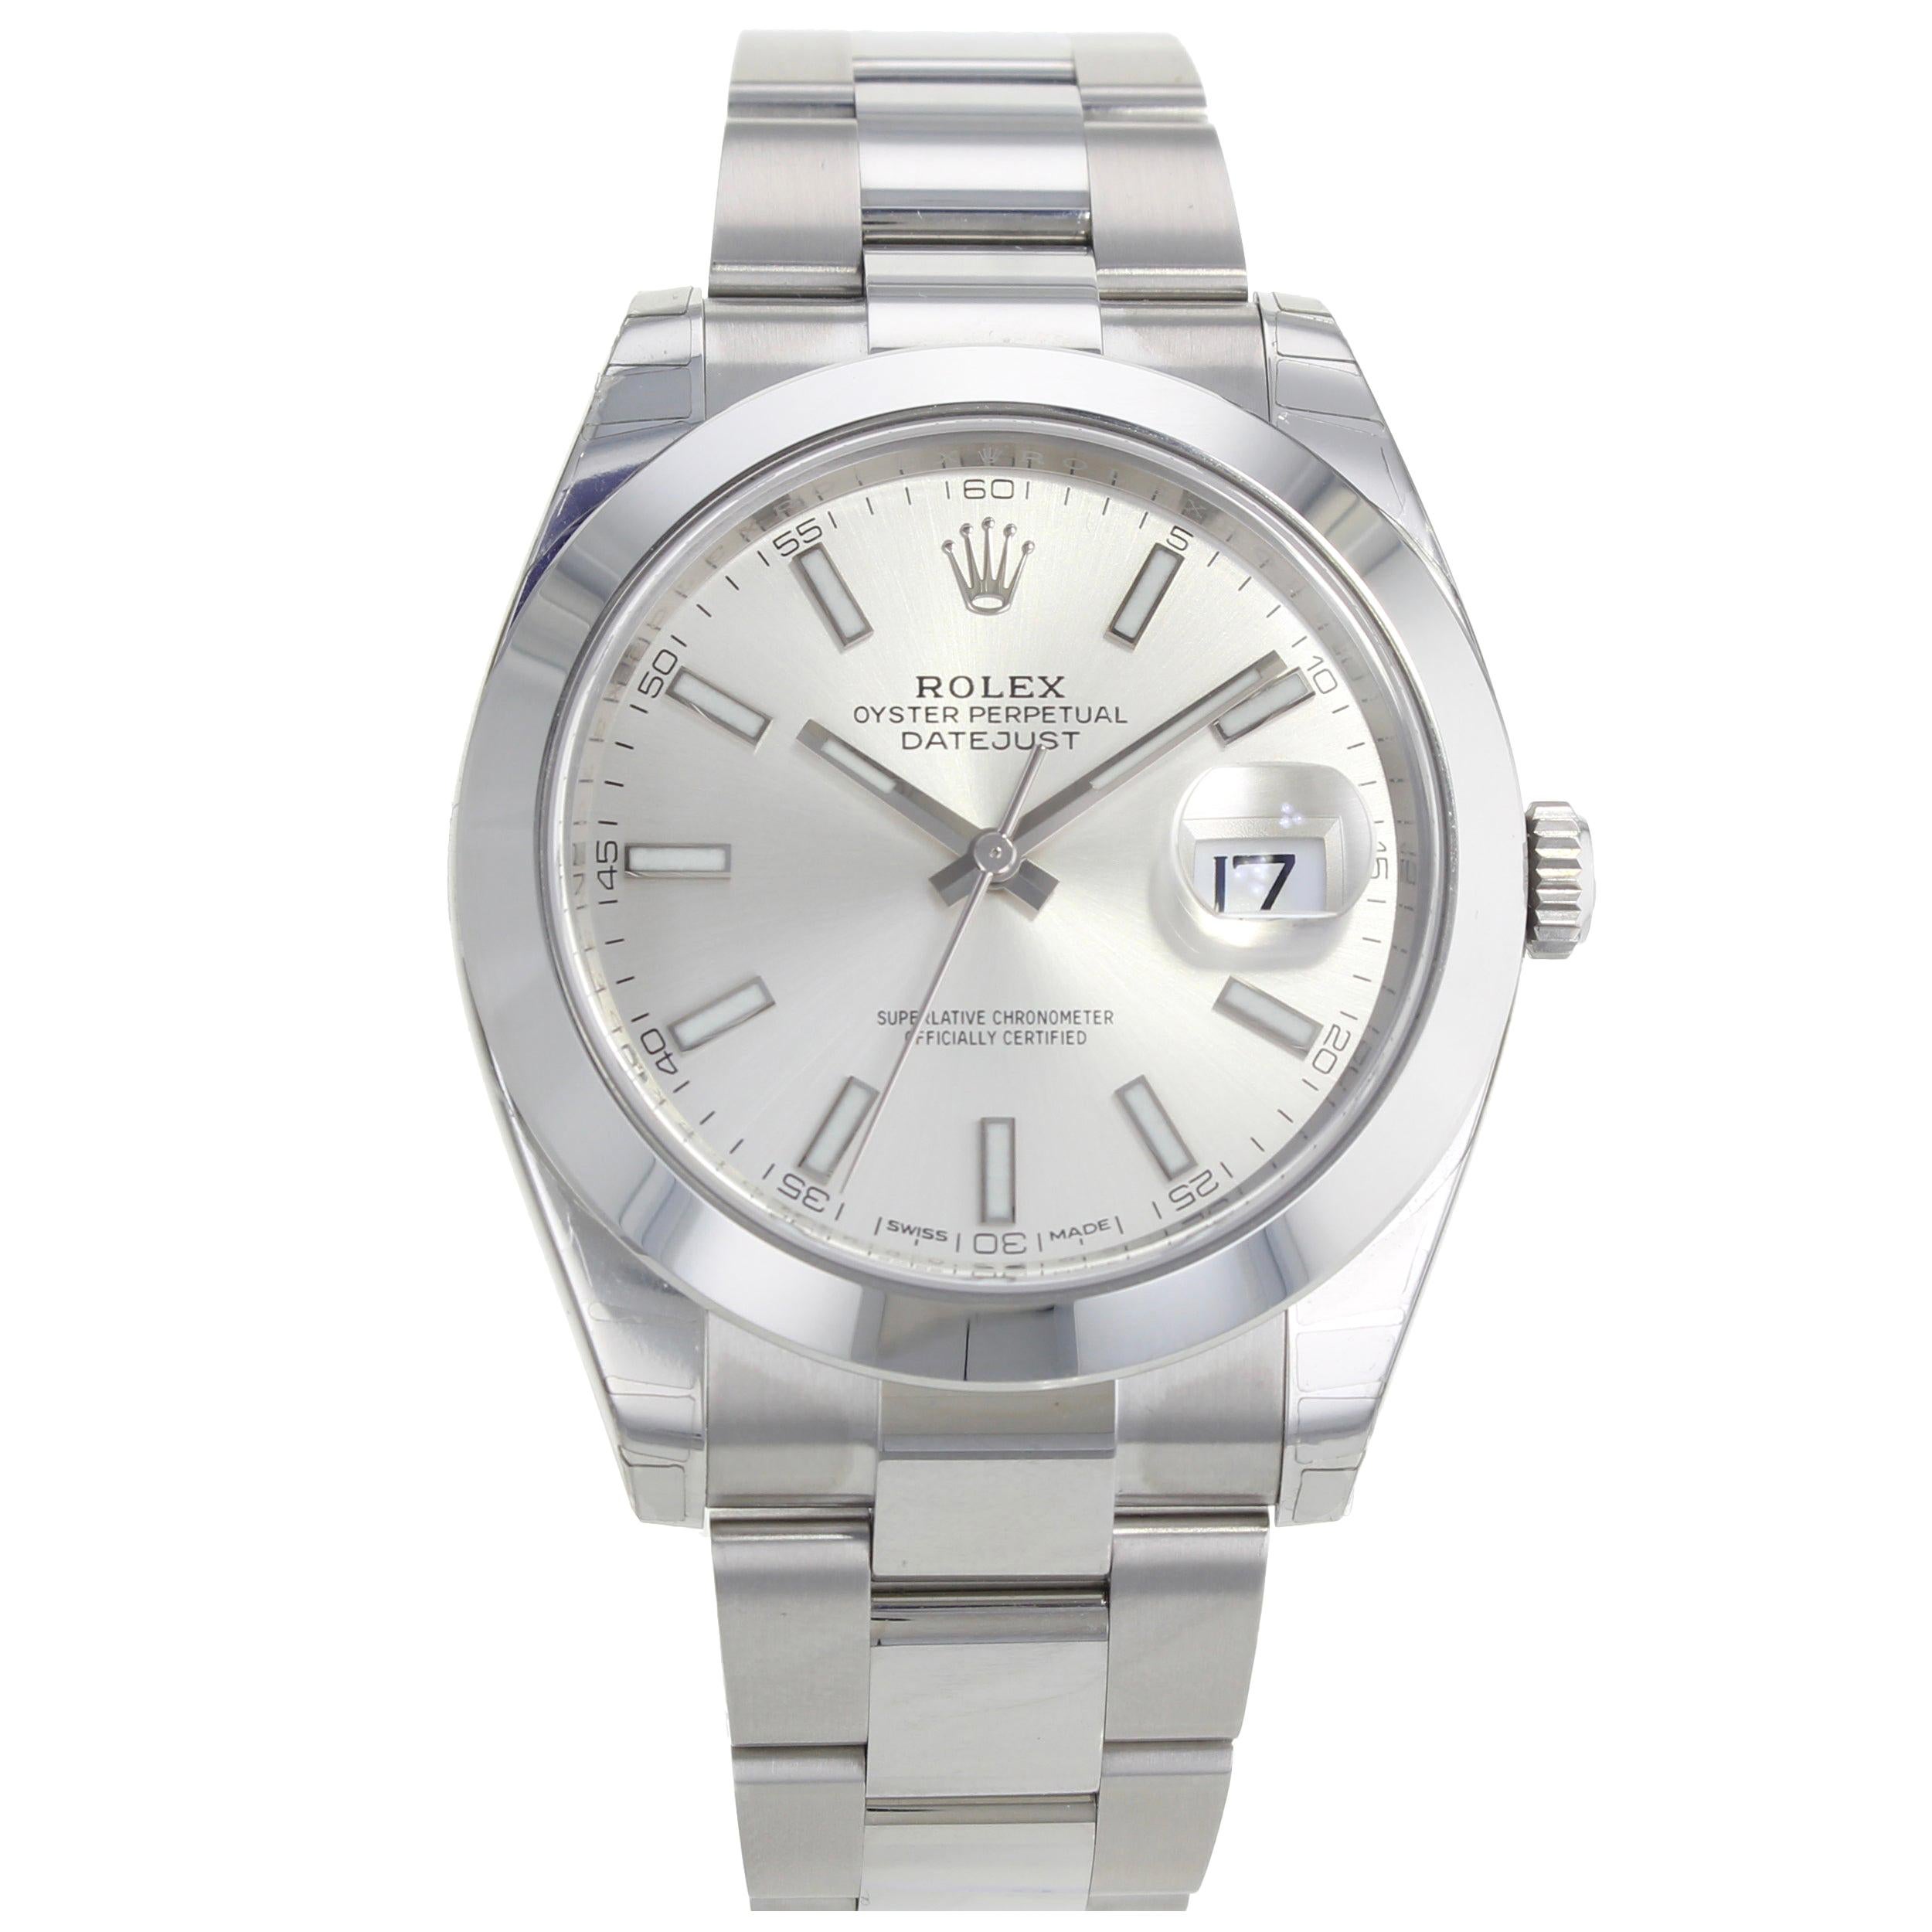 Rolex Datejust 41 Sio 126300 Stainless Steel Automatic Men's Watch